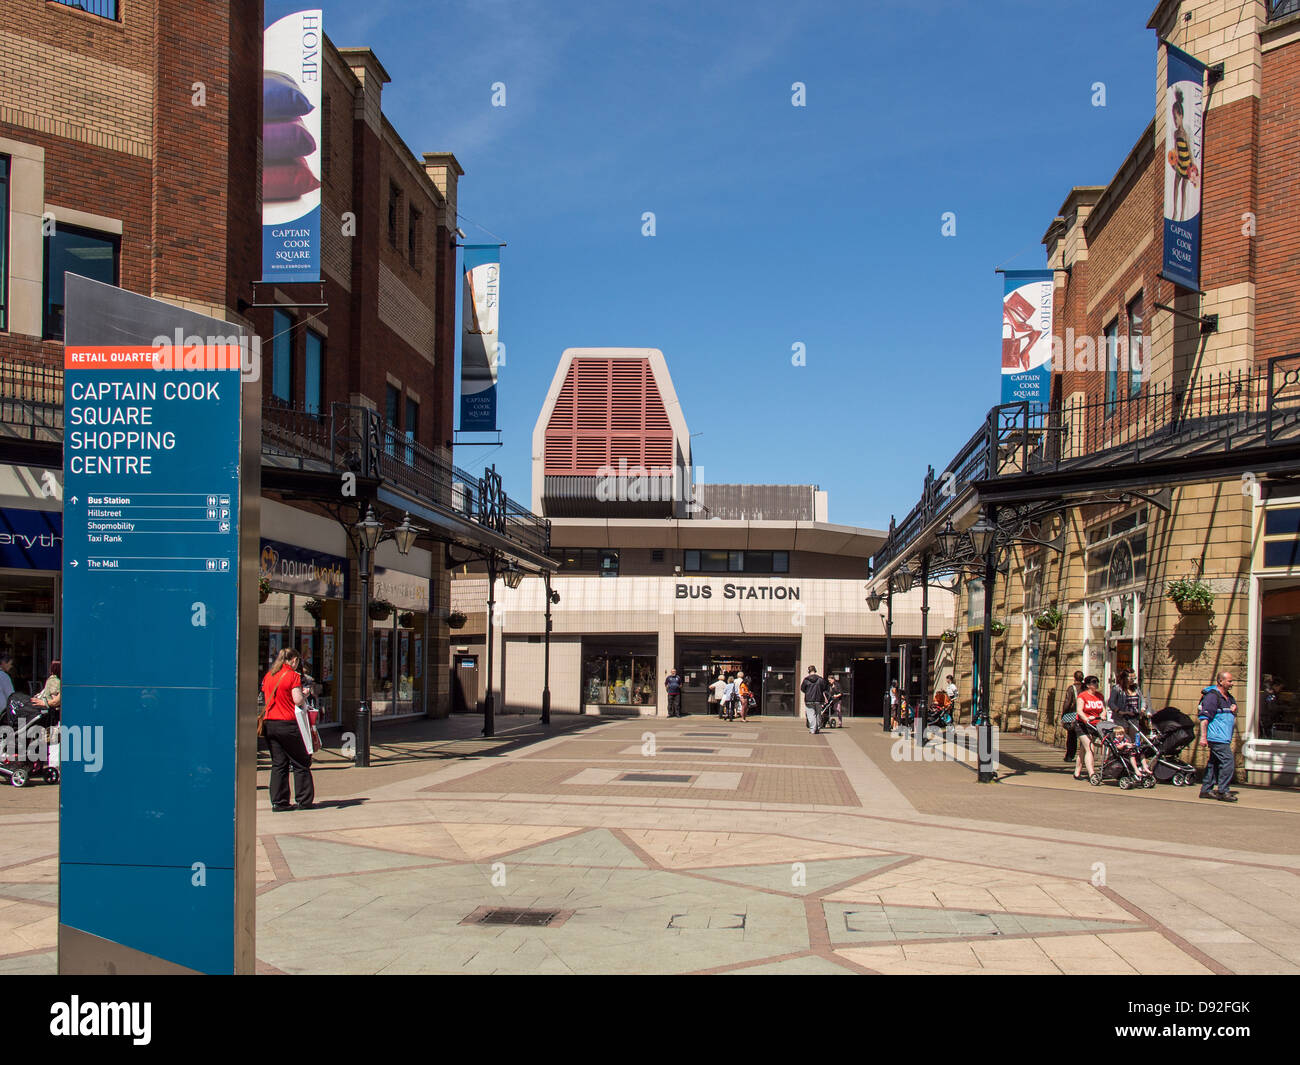 Captain Cook Square shopping and transport hub Middlesbrough UK Stock Photo